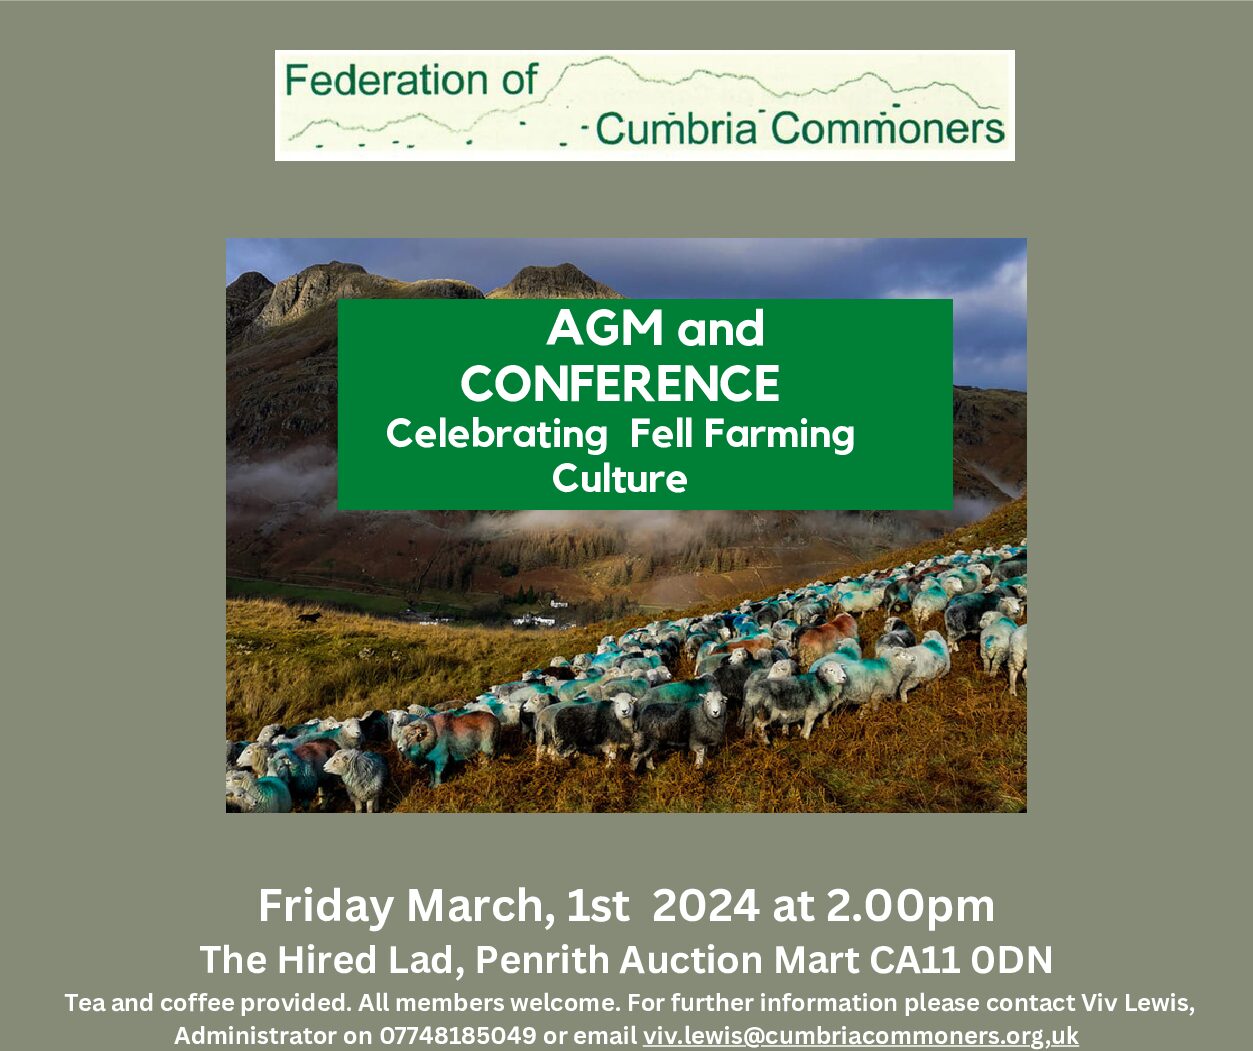 Celebrating commoning culture at the Federation of Cumbria Commoners’ AGM